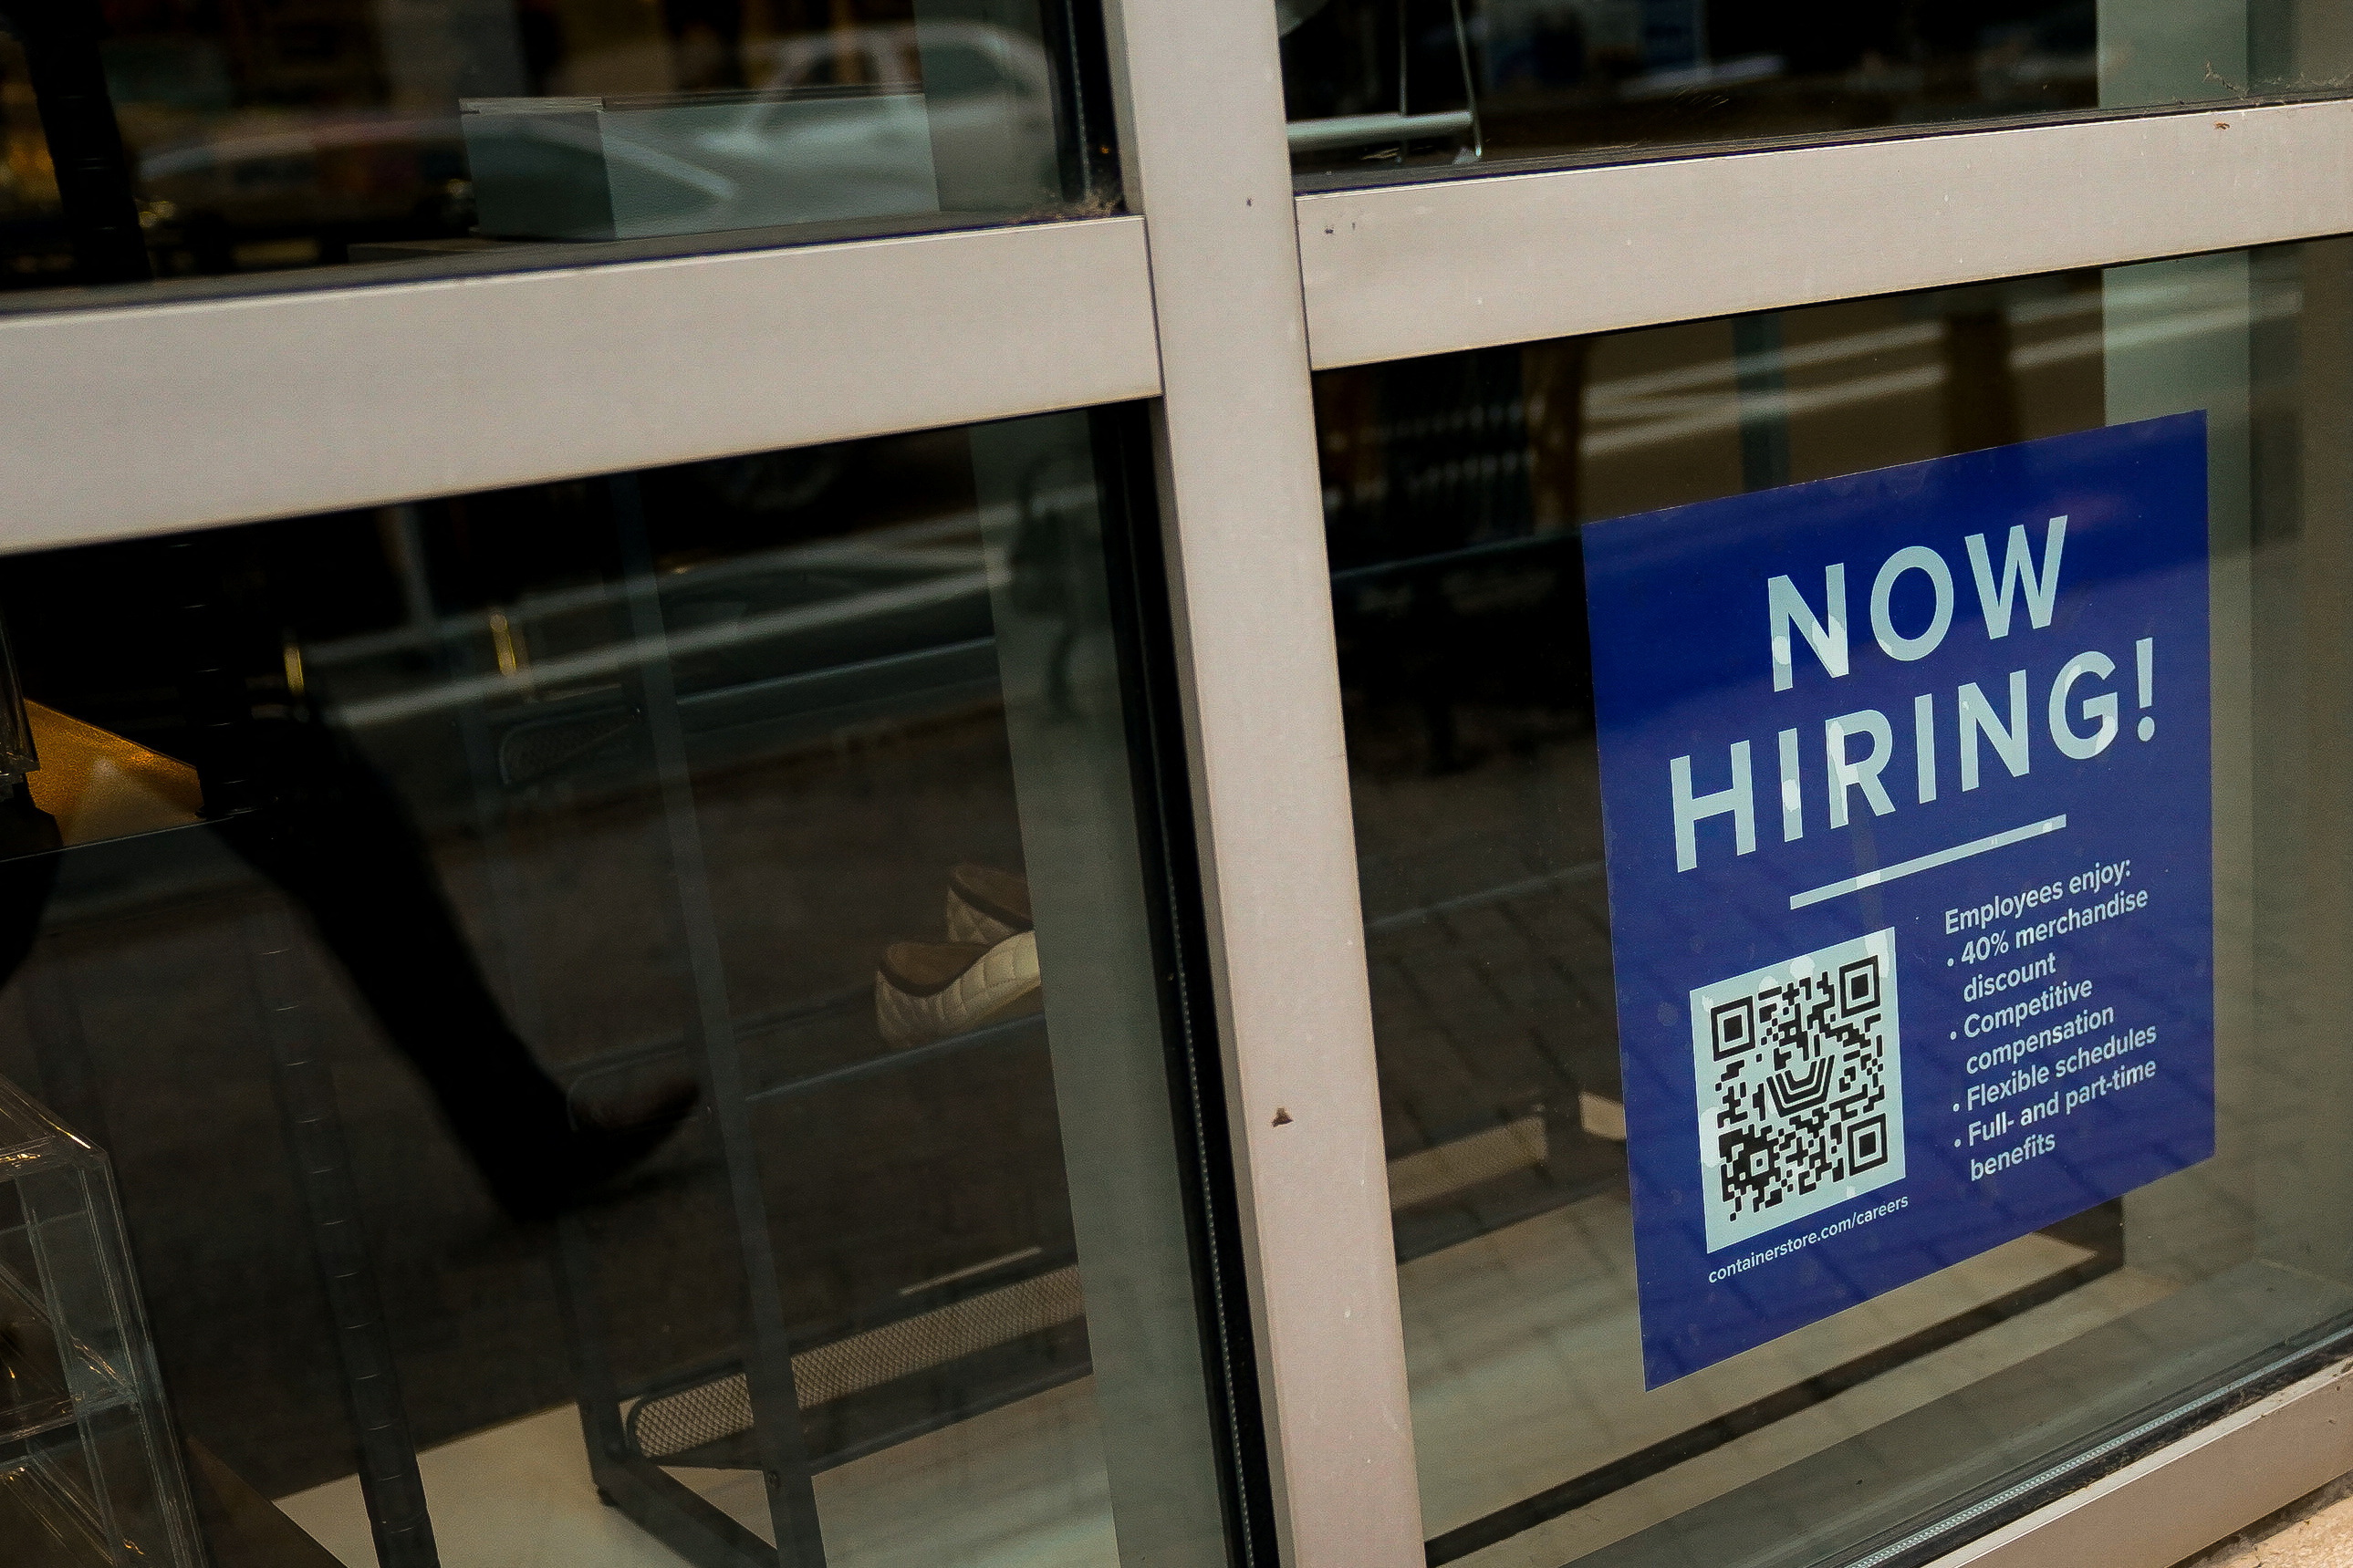 An employee employment sign with a QR code appears in the window of an Arlington business